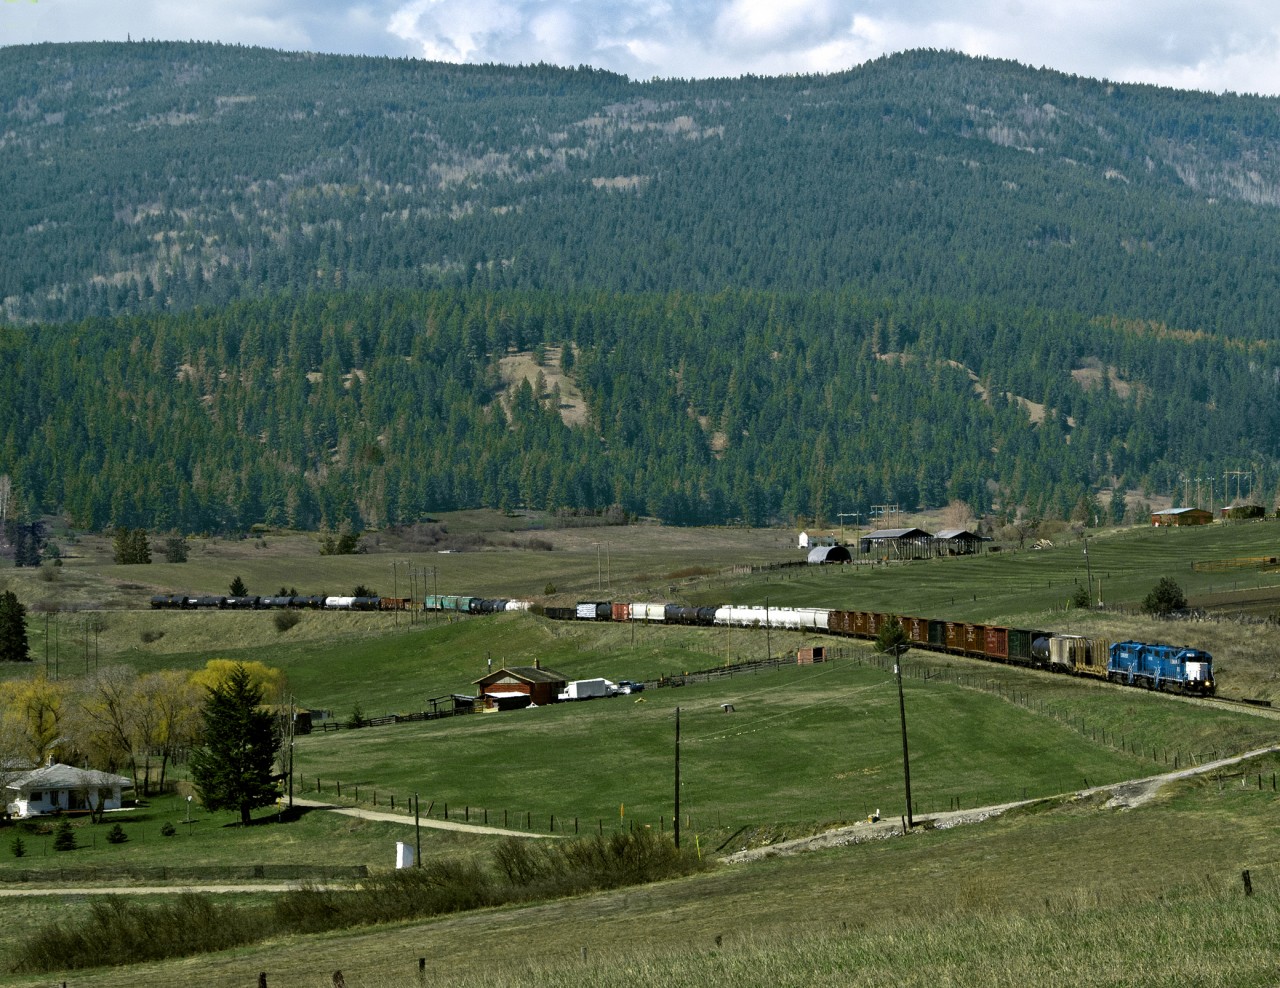 Eastbound Kelowna Pacific(a CN spinoff) Kmloops to Vernon BC freight rolls through the Grandview Valley west of Armstrong. The line was repossessed by CN a year later and the Vernon to Kelowna section was abandoned. Omnitrax's  Okanagan Valley railway (a CP Spin Off from Sicamous to Kelowna sharing the track south of Armstrong) exited operations a year earlier. Kelowna, largest city in BC's interior is now without ra1l service, but industrial Parks in the Vernon area keep the line busy for CN